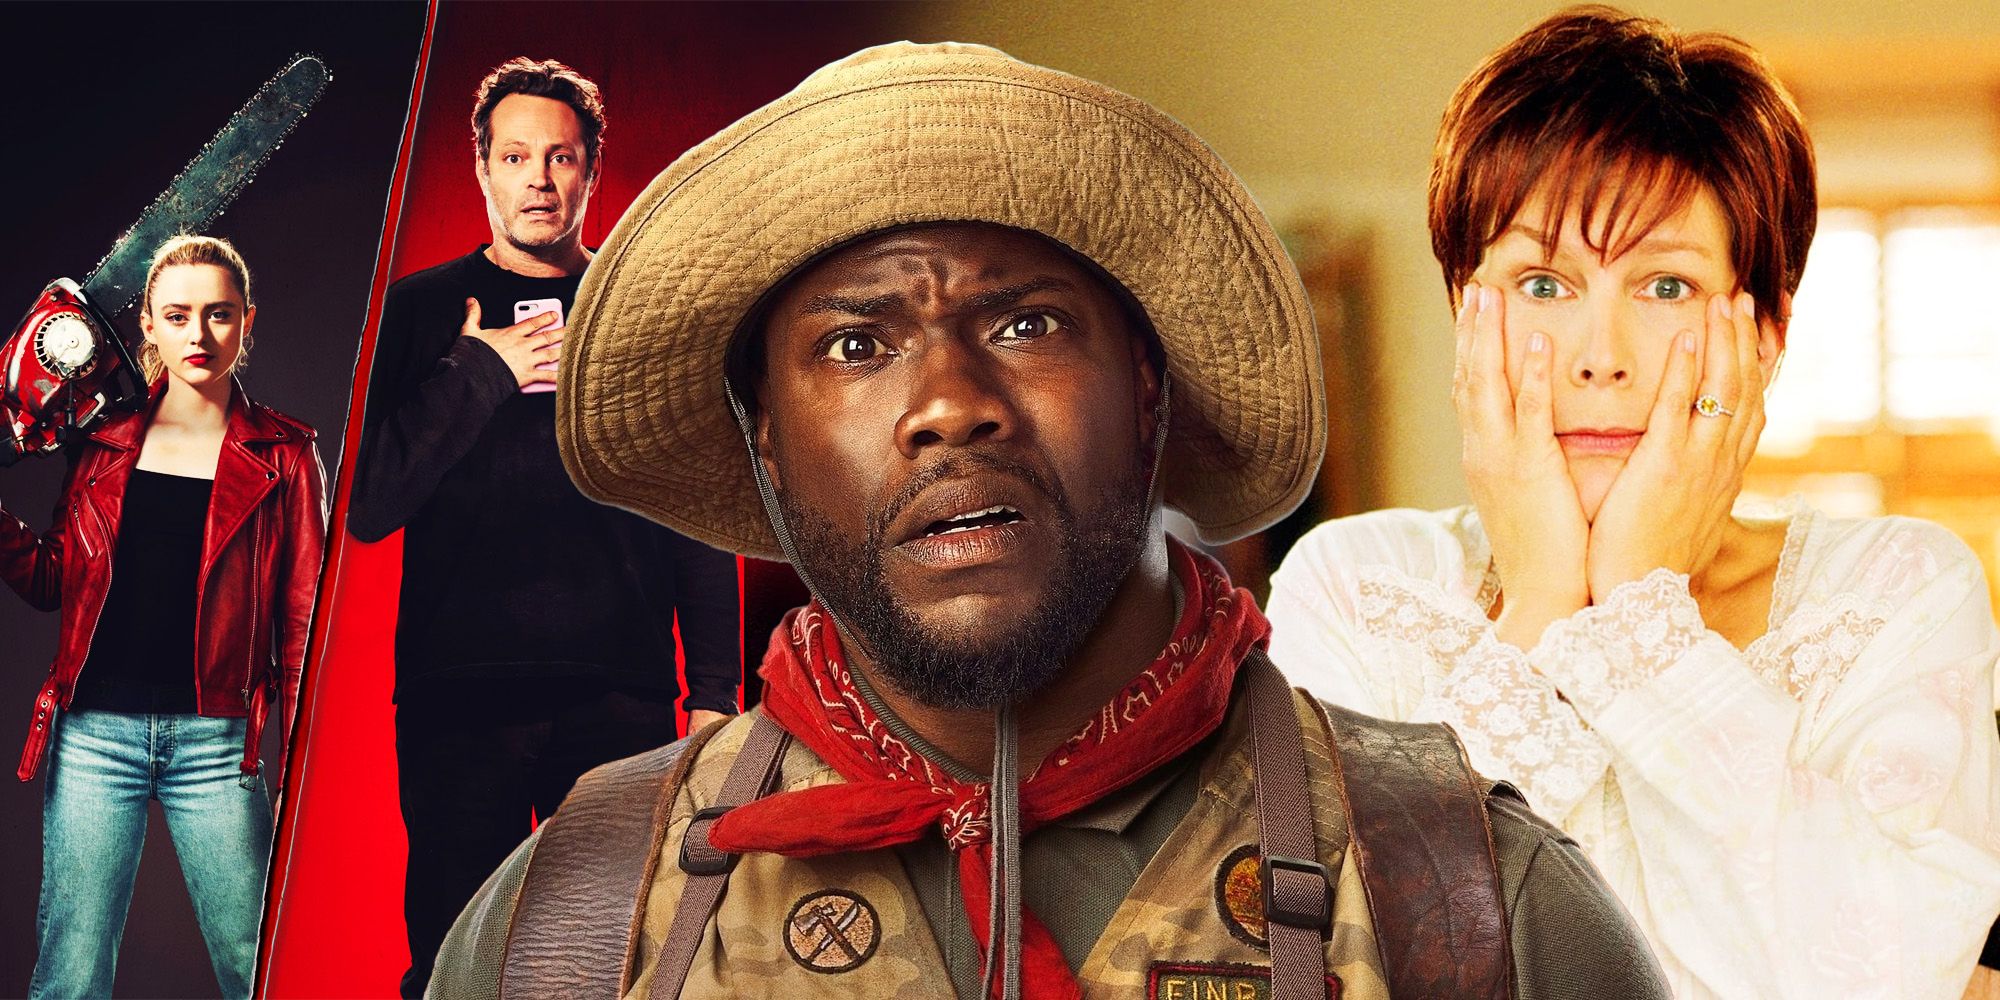 A composite image features characters from Freaky, Jumanji and Freaky Friday